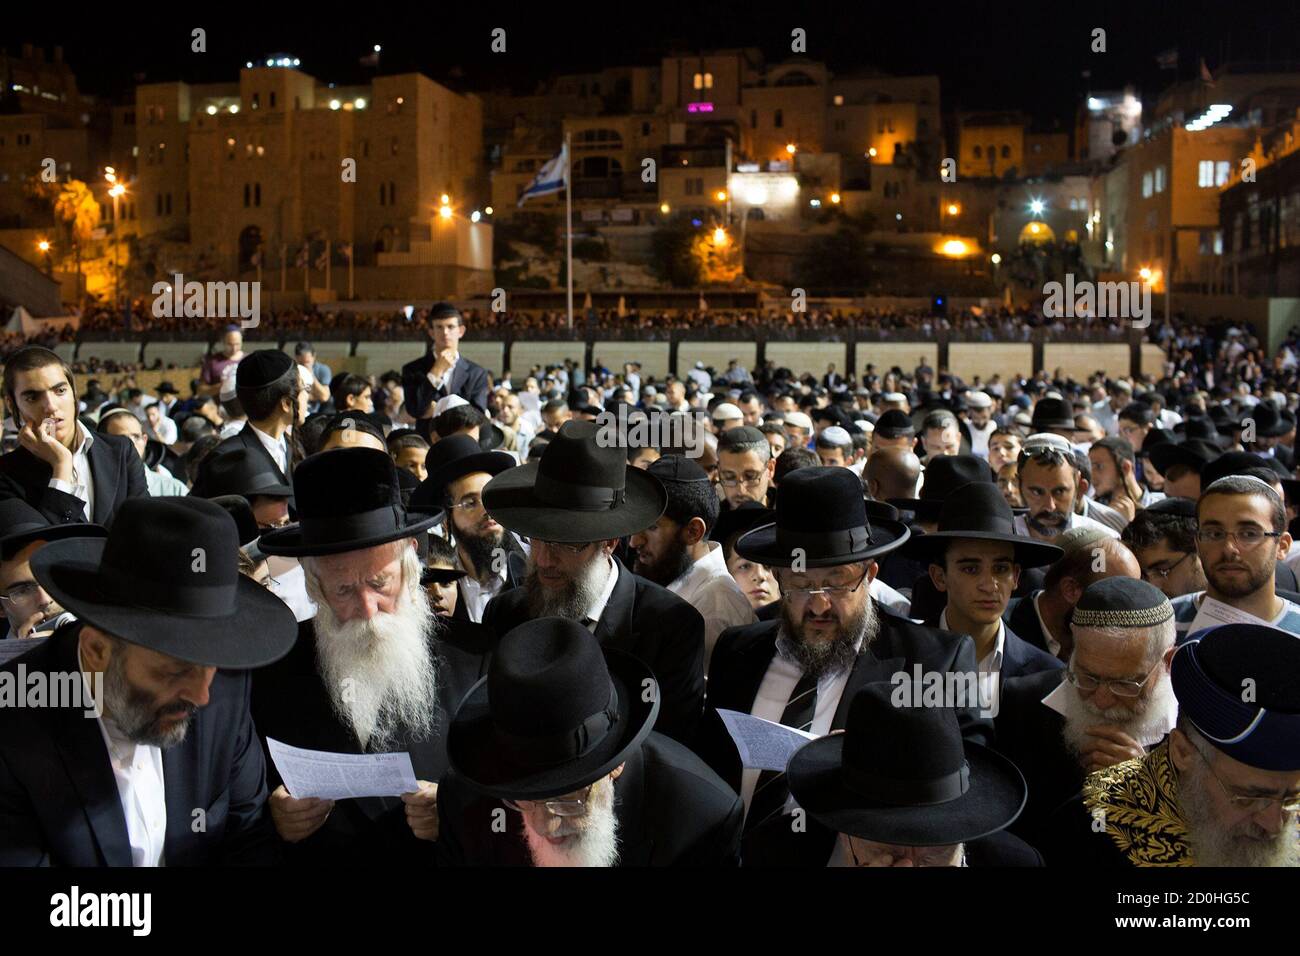 Jewish worshippers take part in a special prayer at the Western Wall in Jerusalem's Old City for the well-being of Israeli soldiers in Gaza July 23, 2014. Gaza fighting raged on Wednesday, displacing thousands more Palestinians in the battered territory as U.S. Secretary of State John Kerry said efforts to secure a truce between Israel and Hamas had made some progress. Israel announced that three of its soldiers were killed by explosive devices on Wednesday, lifting the army death toll to 32.  REUTERS/Siegfried Modola (JERUSALEM - Tags: RELIGION CIVIL UNREST CONFLICT) Stock Photo